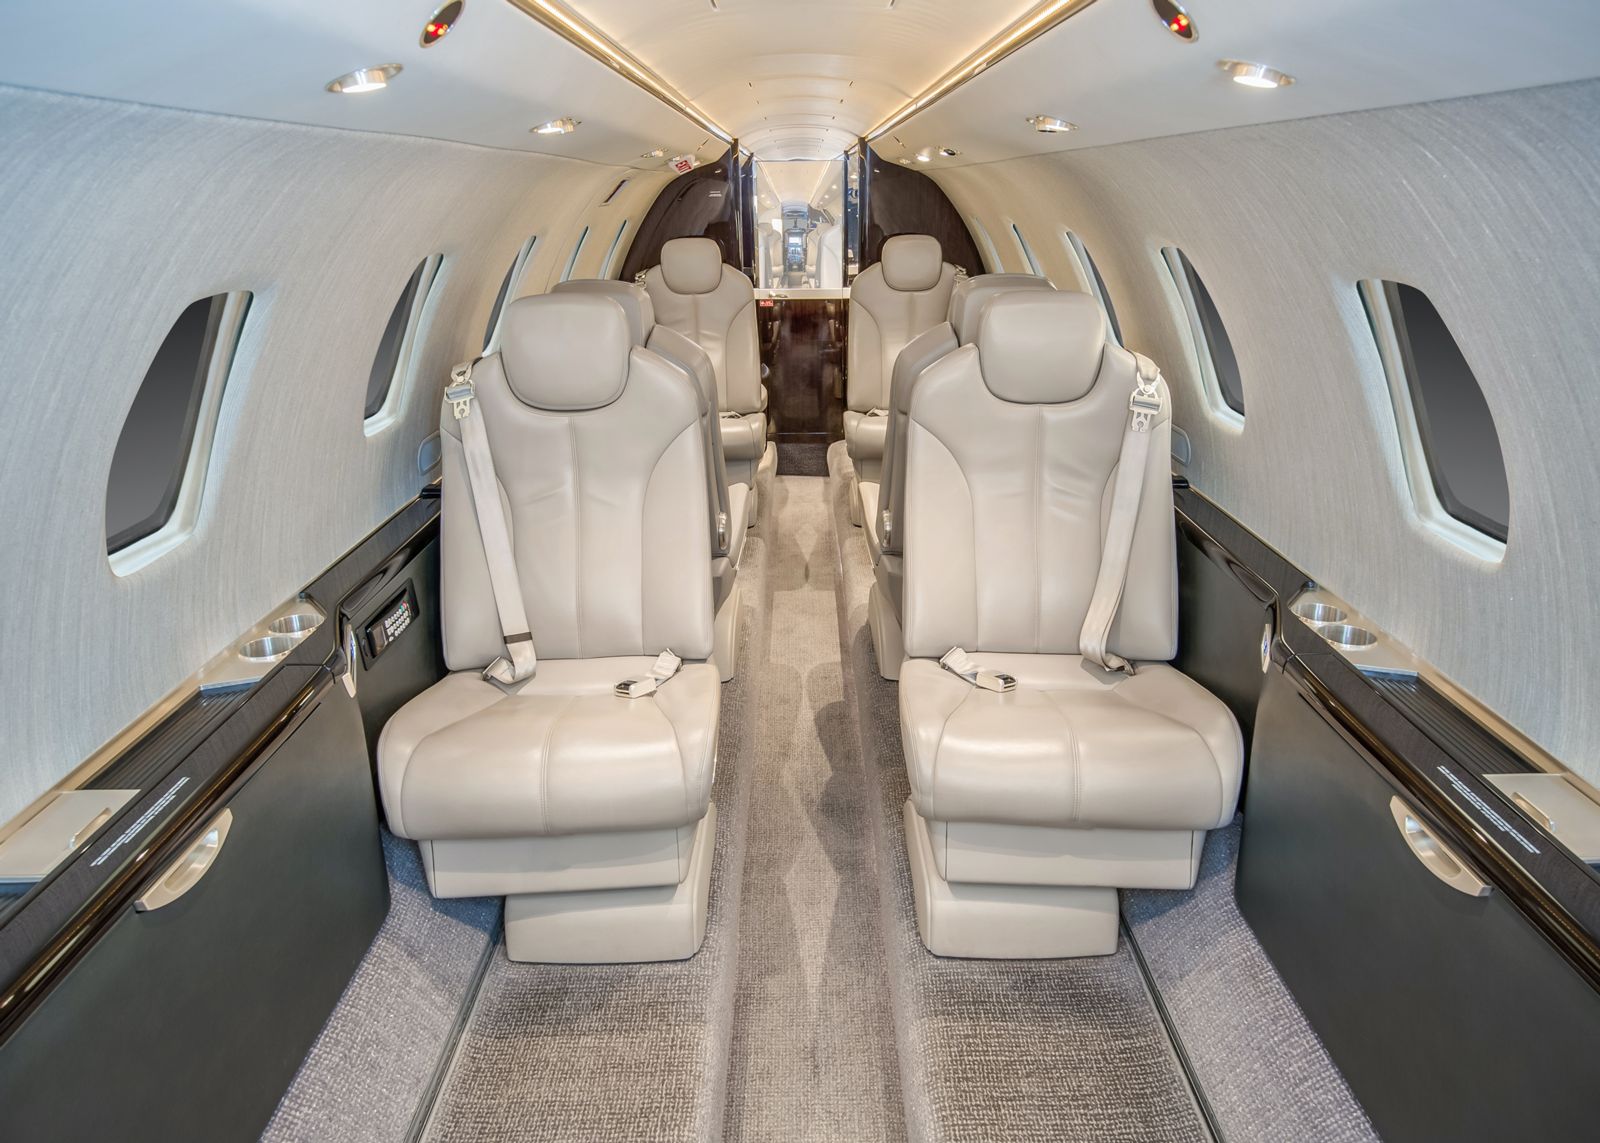 Cessna/Textron Citation X+  S/N 525 for sale | gallery image: /userfiles/images/Citation_X_Plus_sn525/fwd%20aft.jpg